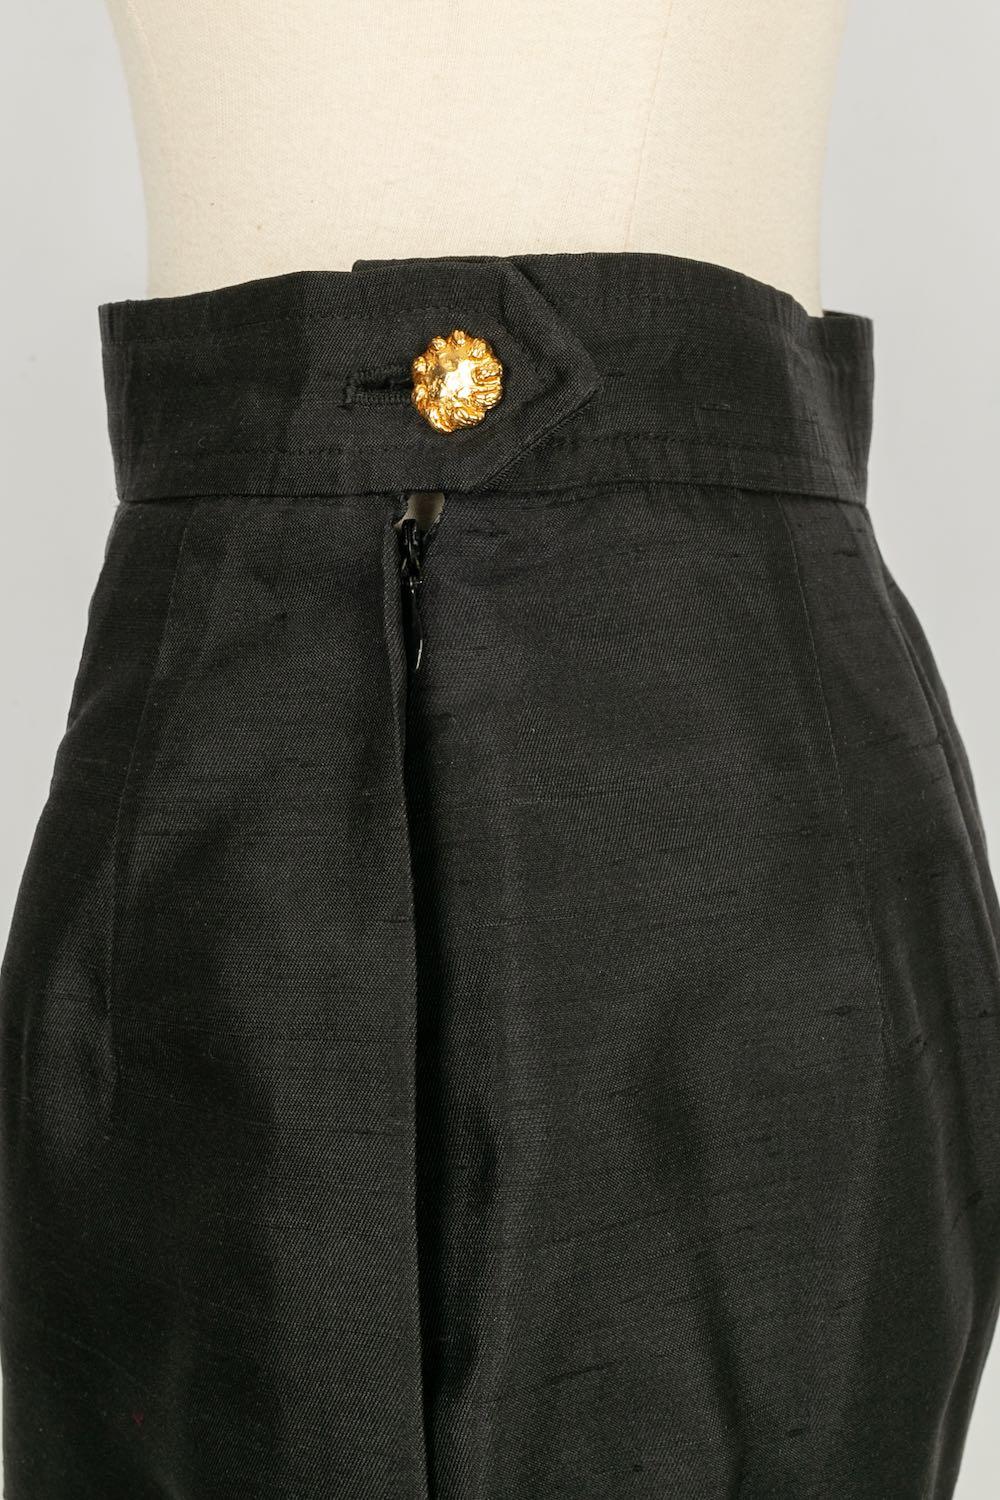 Christian Lacroix Black Silk and Hammered Gold Metal Buttons Ensemble For Sale 7